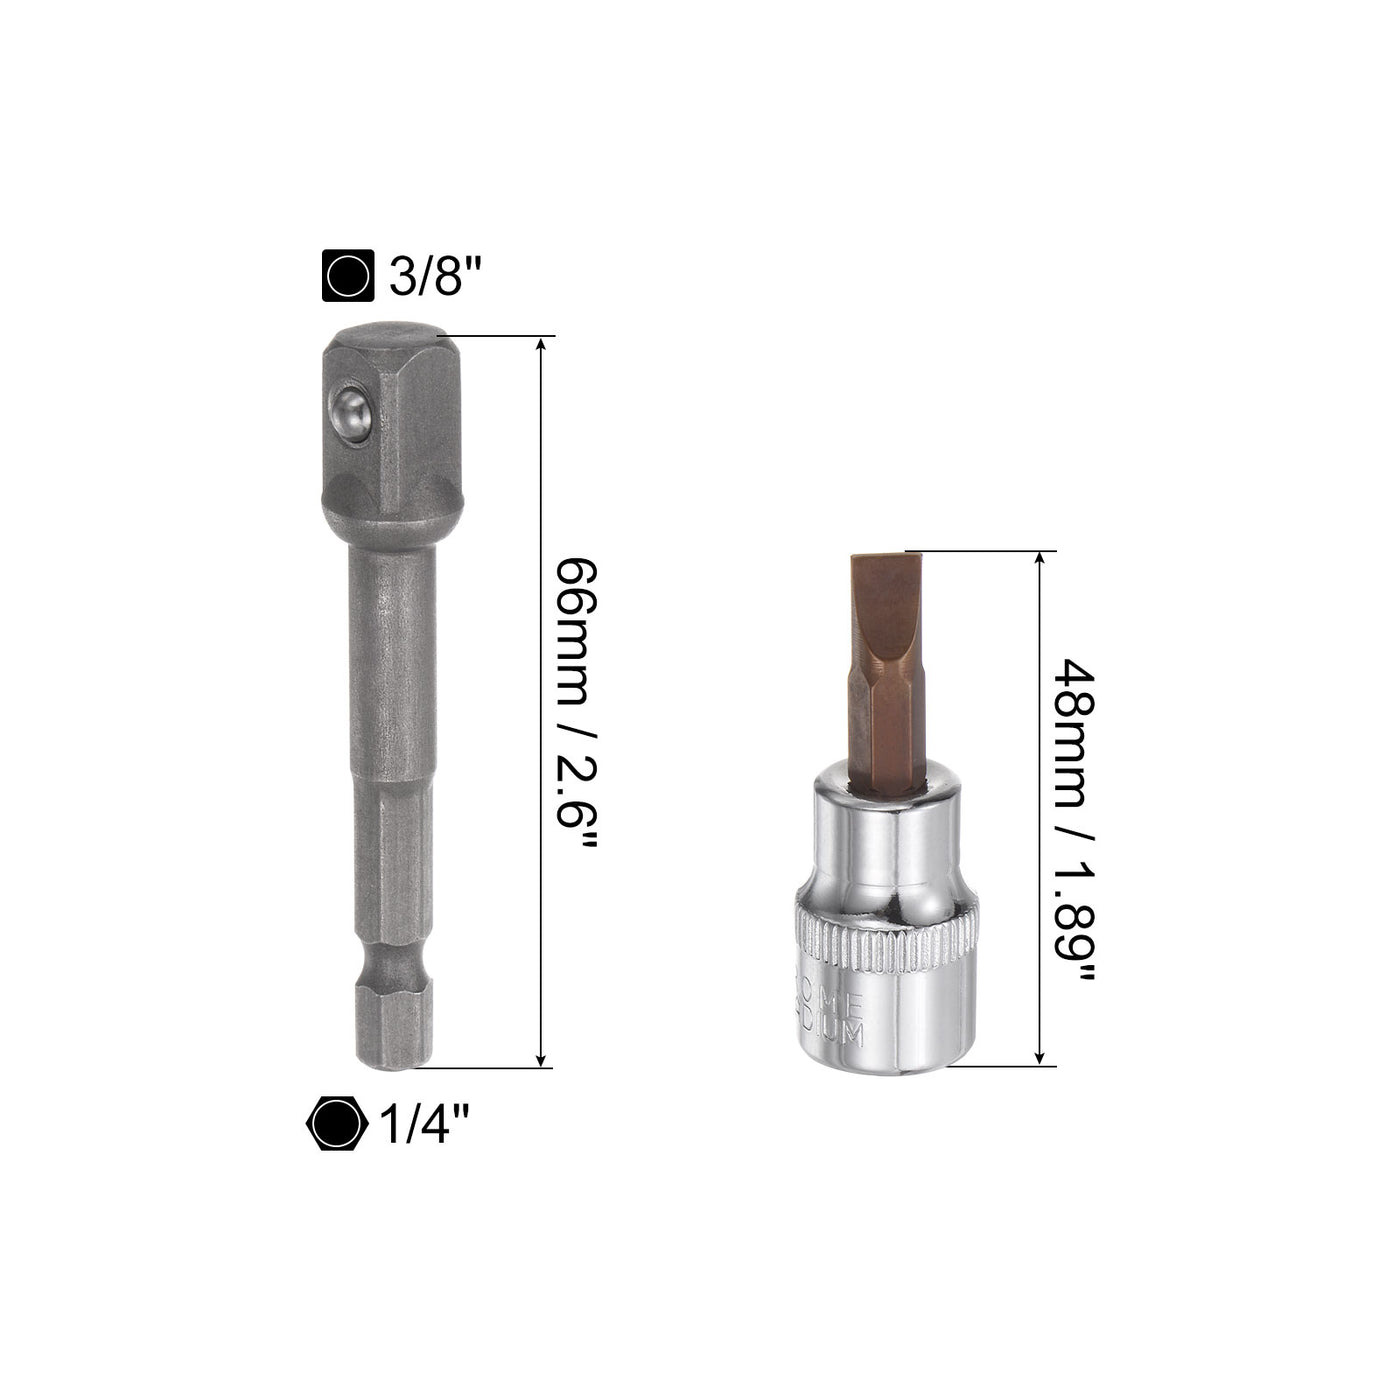 uxcell Uxcell FD6.5 Slotted Bit Socket 3/8" Drive 1.89" Length W Hex Shank Power Drill Adapter